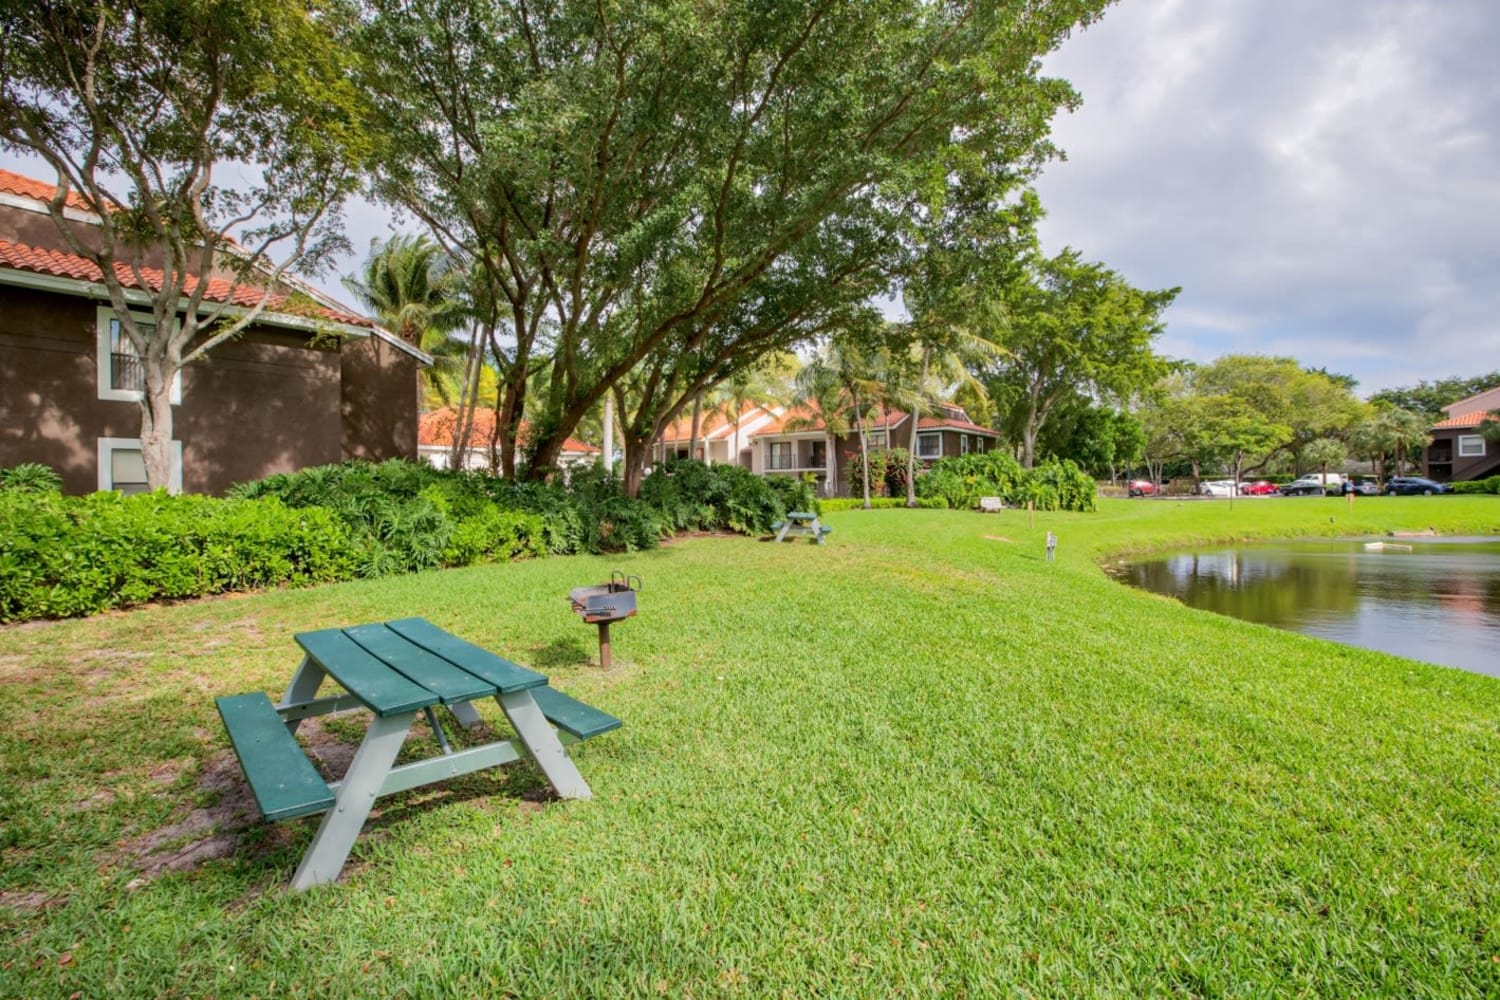 Picnic table on the lawn at Village Place Apartment Homes in West Palm Beach, Florida